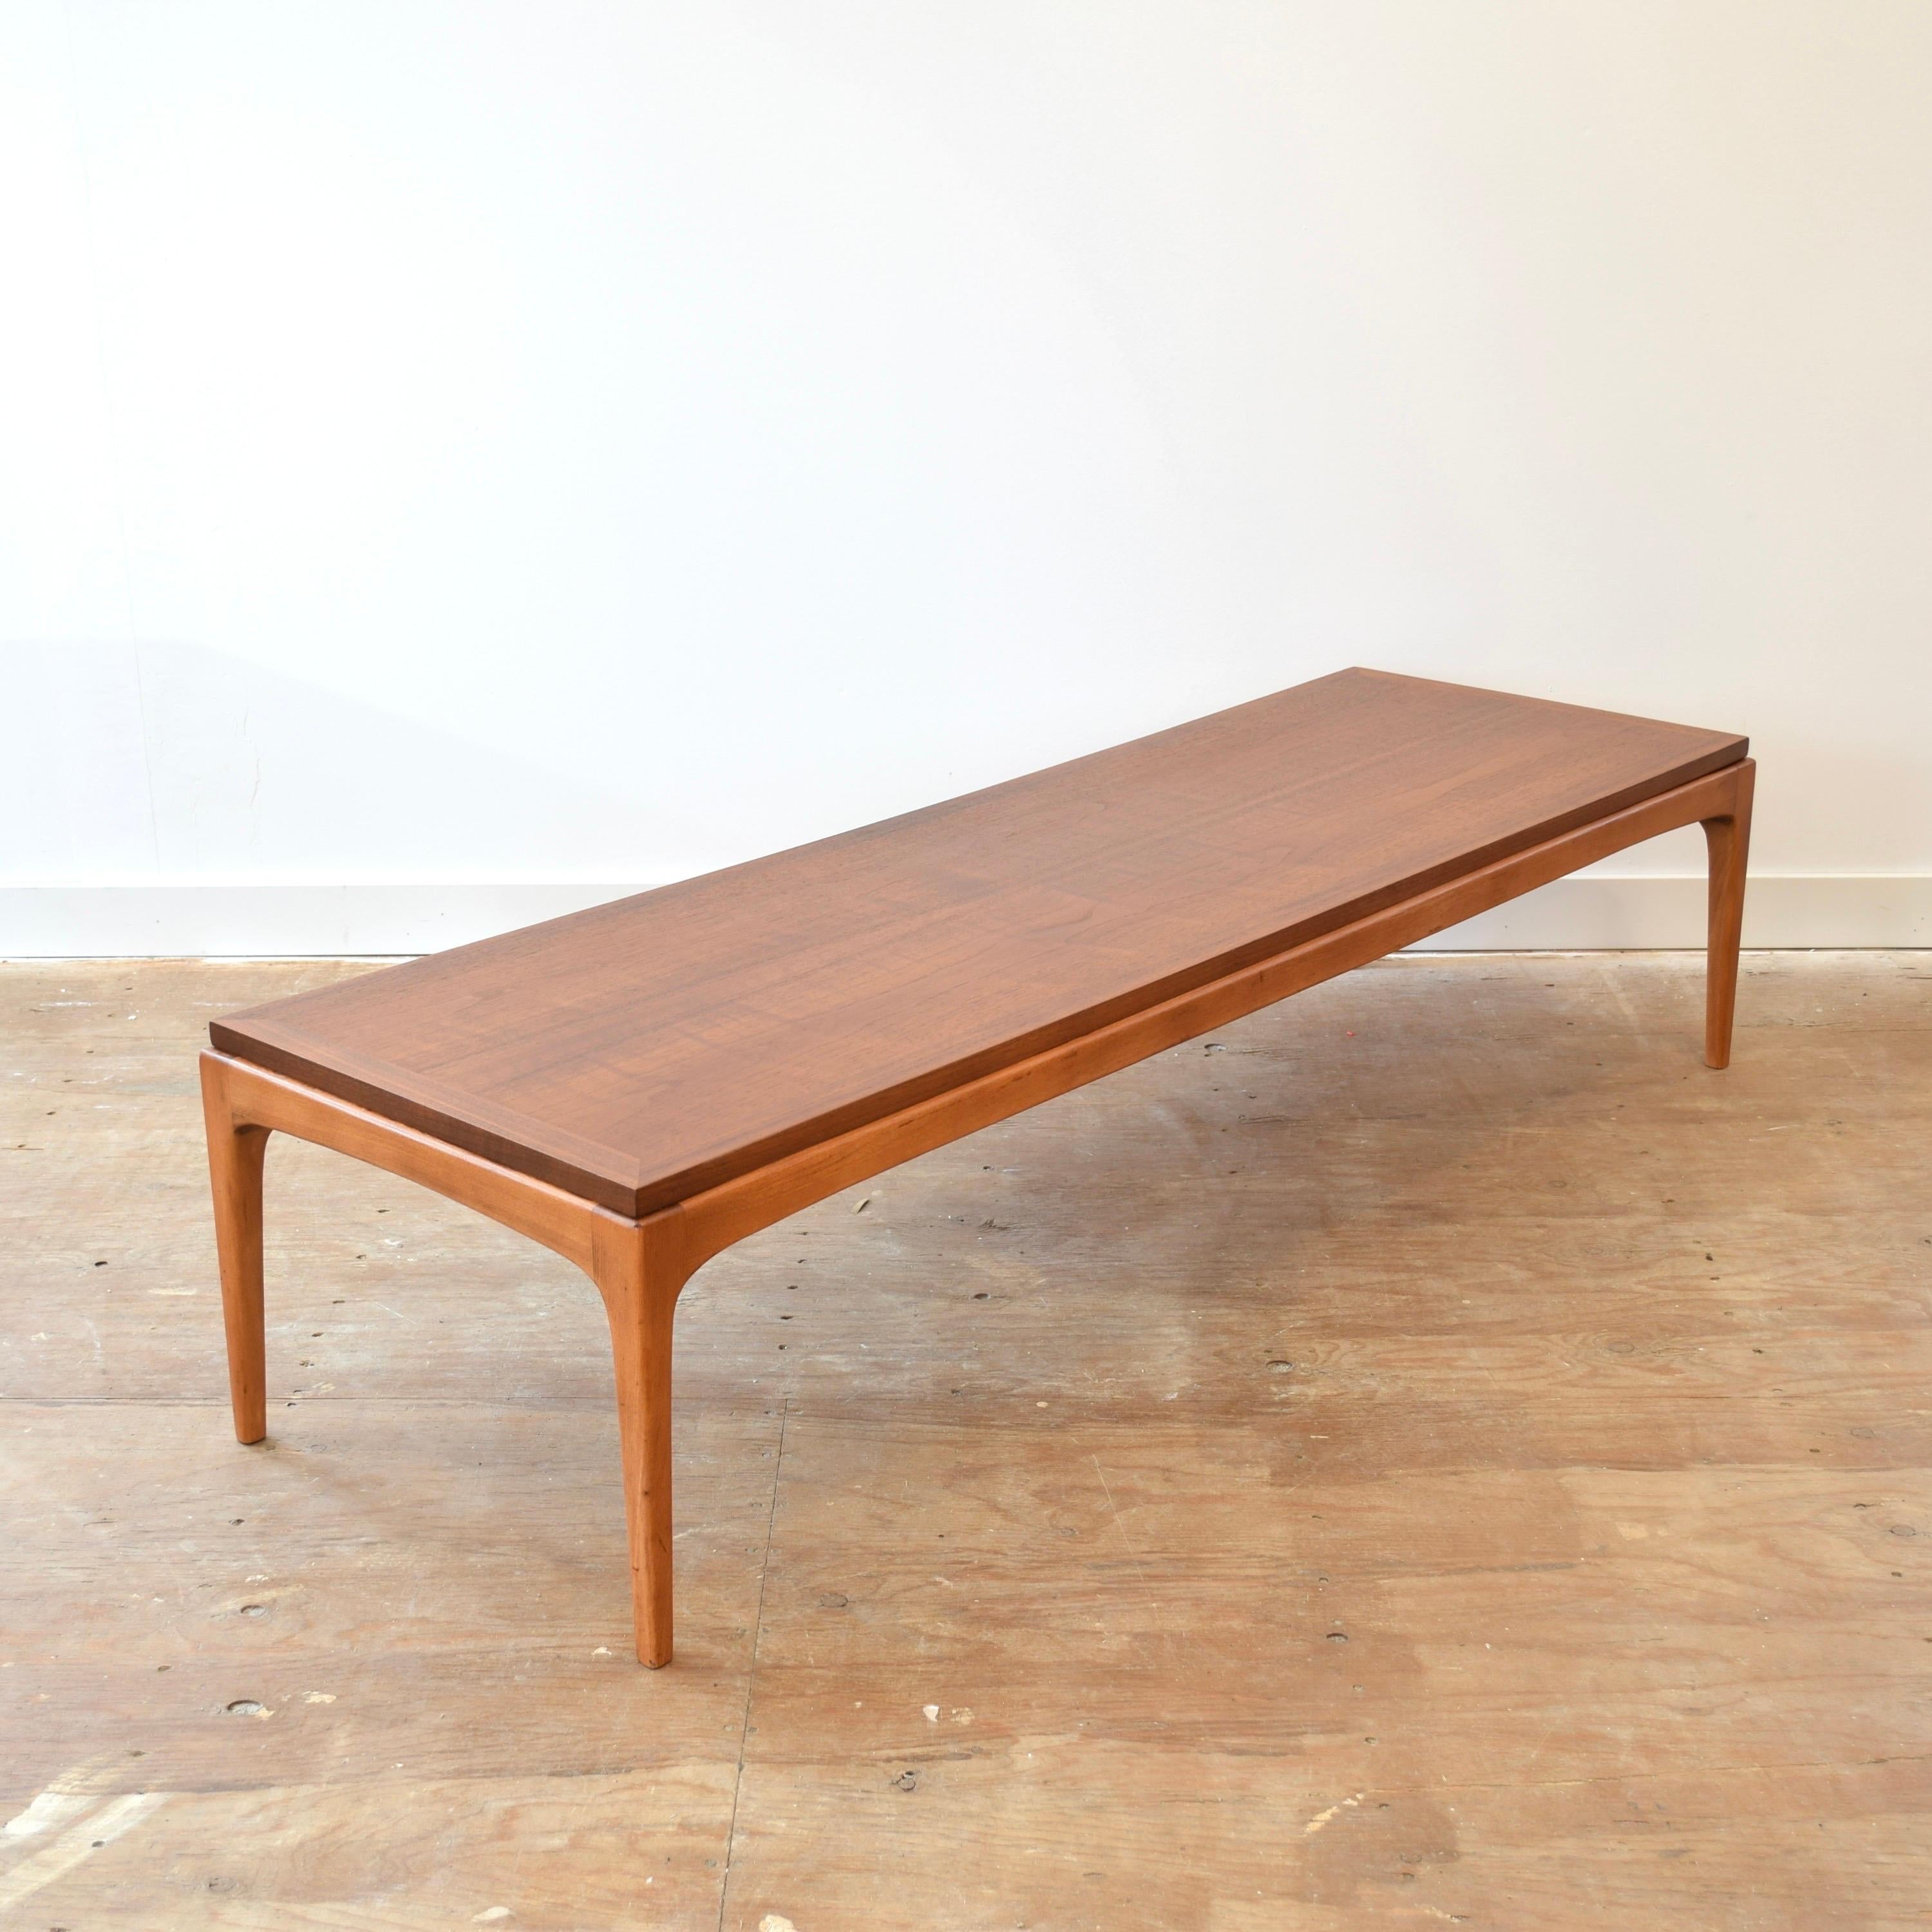 Condition: Refinished

Dimensions: 60” L x 19.5” D x 13.75” H

Description: A vintage walnut coffee table. Made in Canada, circa 1960s-70s. Designed by Lane and manufactured under license in Canada by Knetchel. Part of the Lane Rhythm line. 